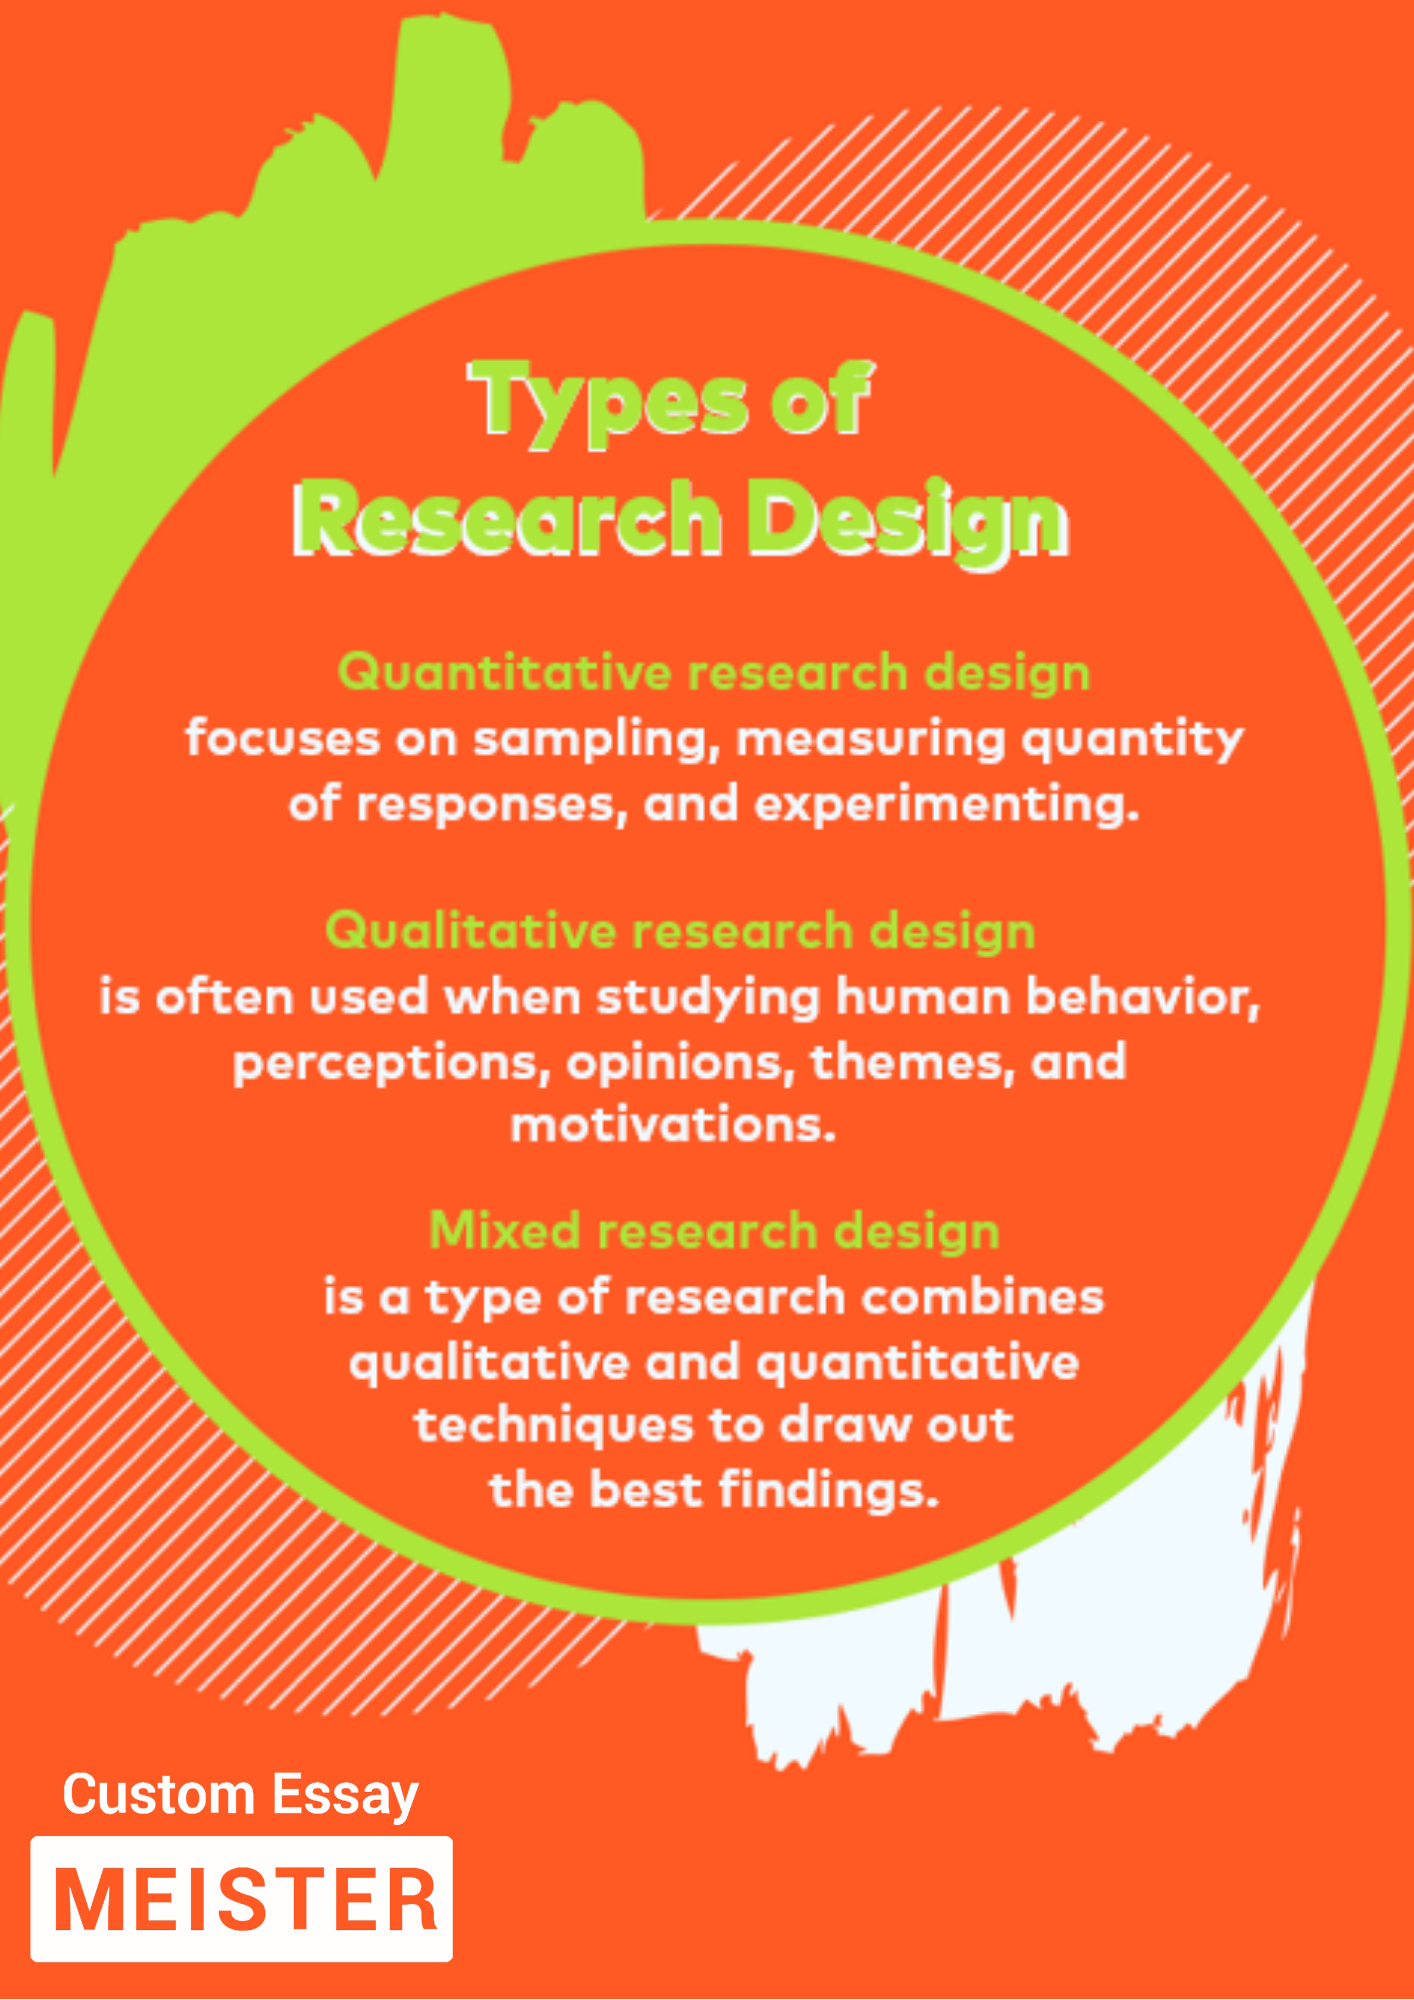 how to write a research design